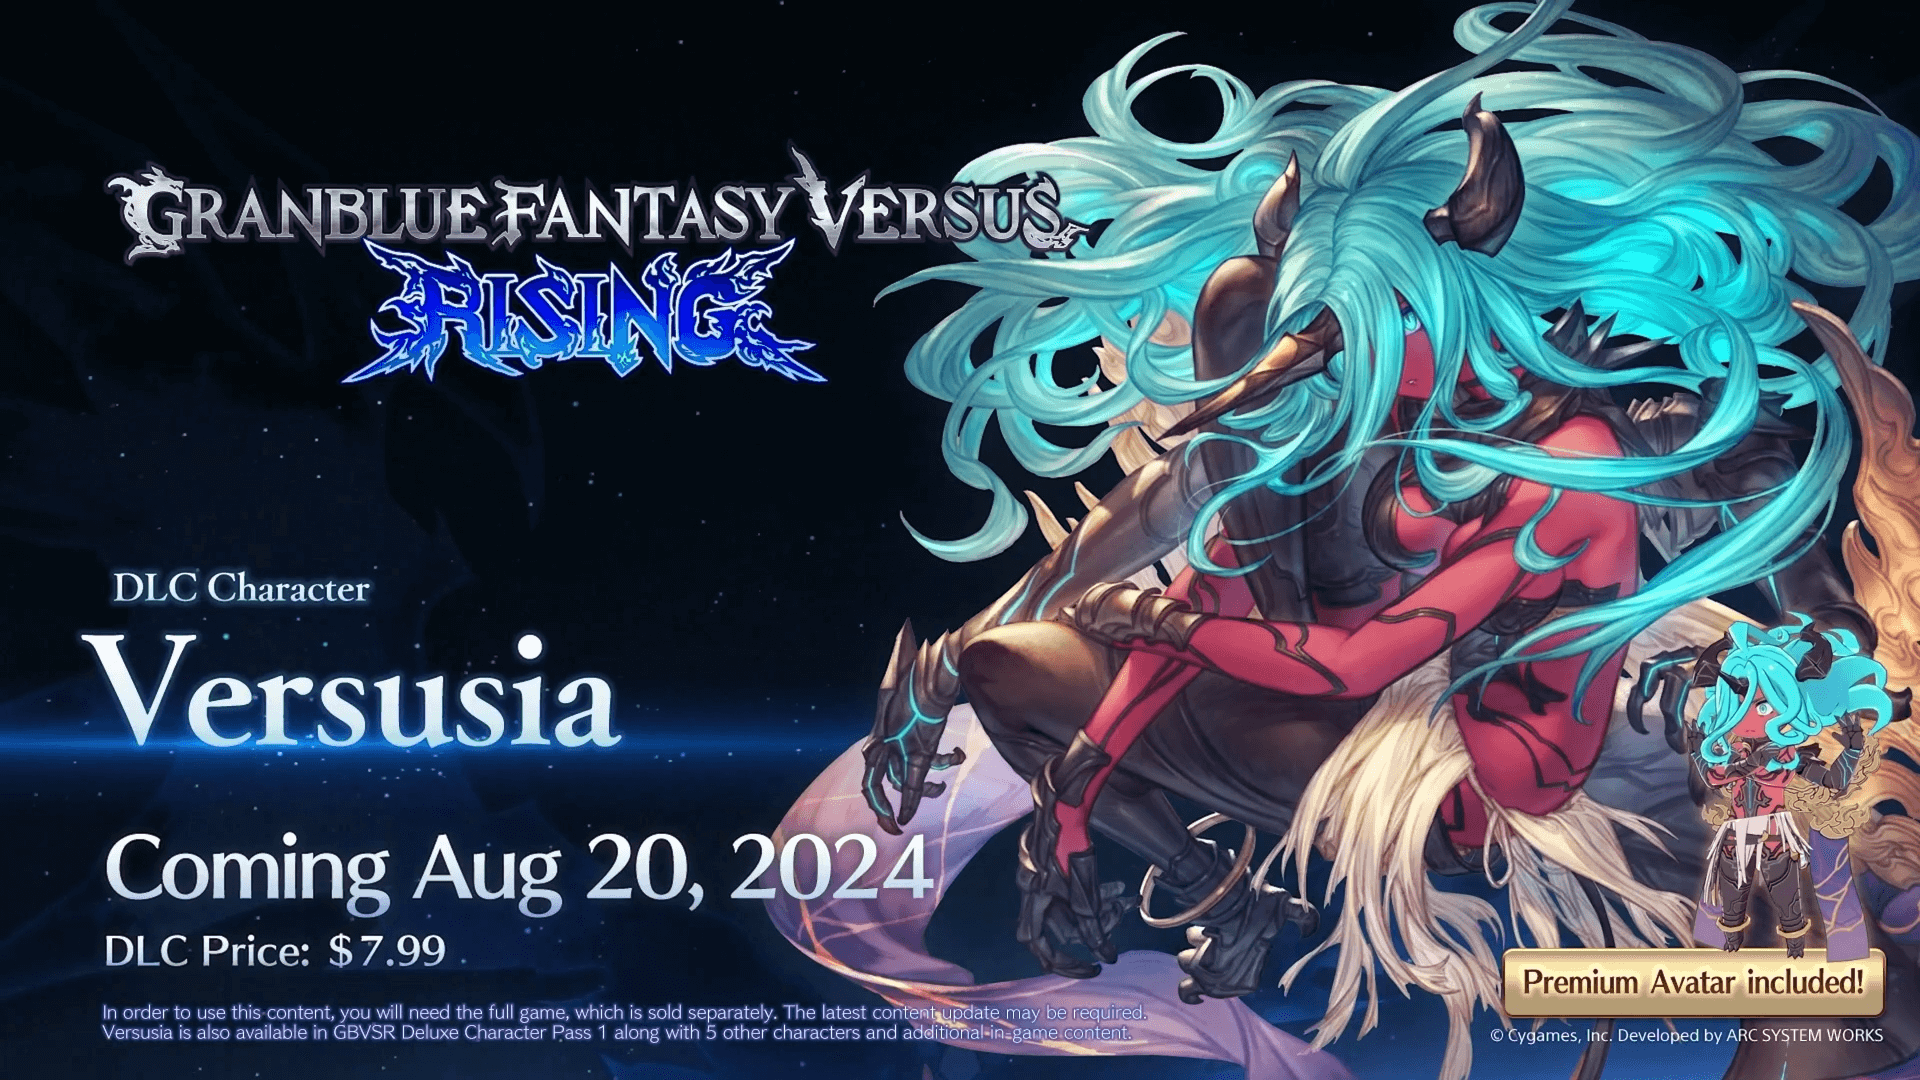 Versusia slated for August in GBVSR, Vikala and Sandalphon Confirmed